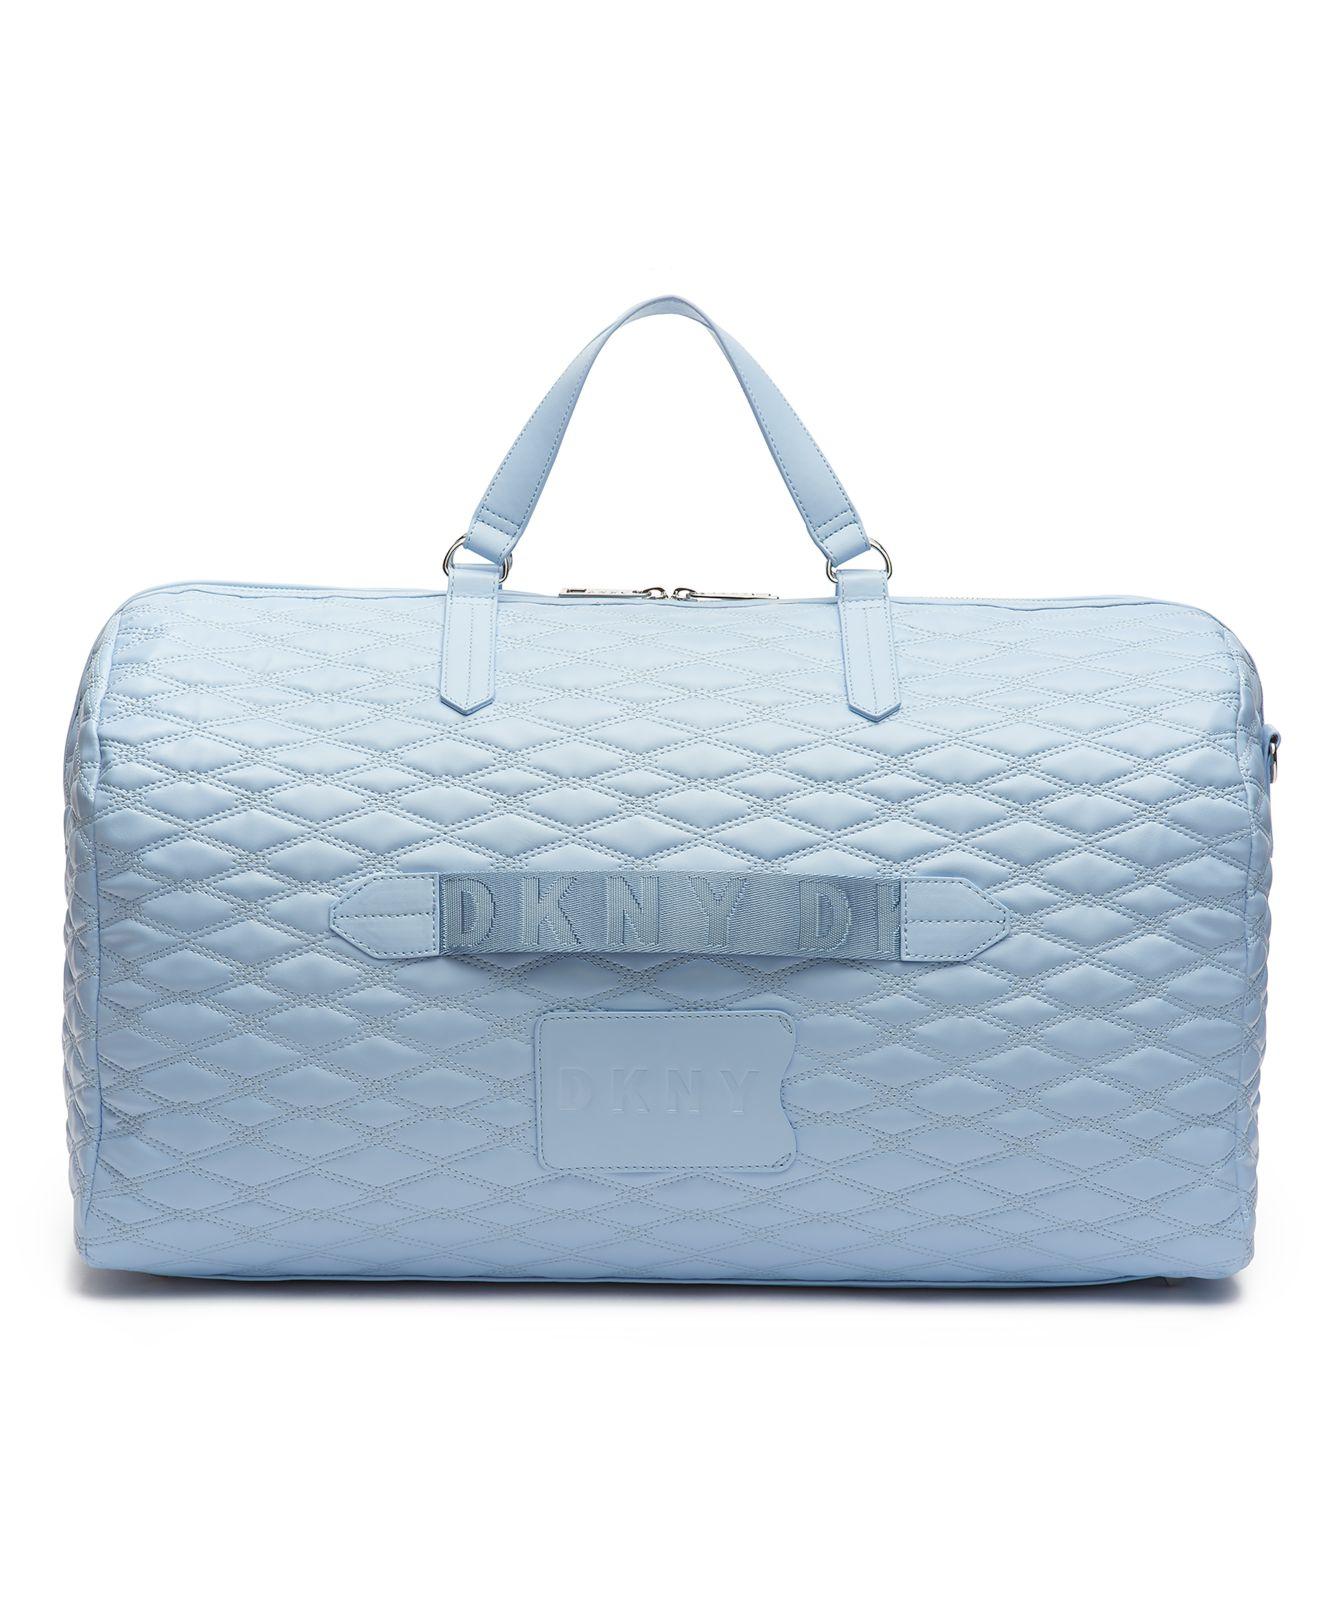 DKNY Allure Quilted Barrel Duffle Large in Blue | Lyst